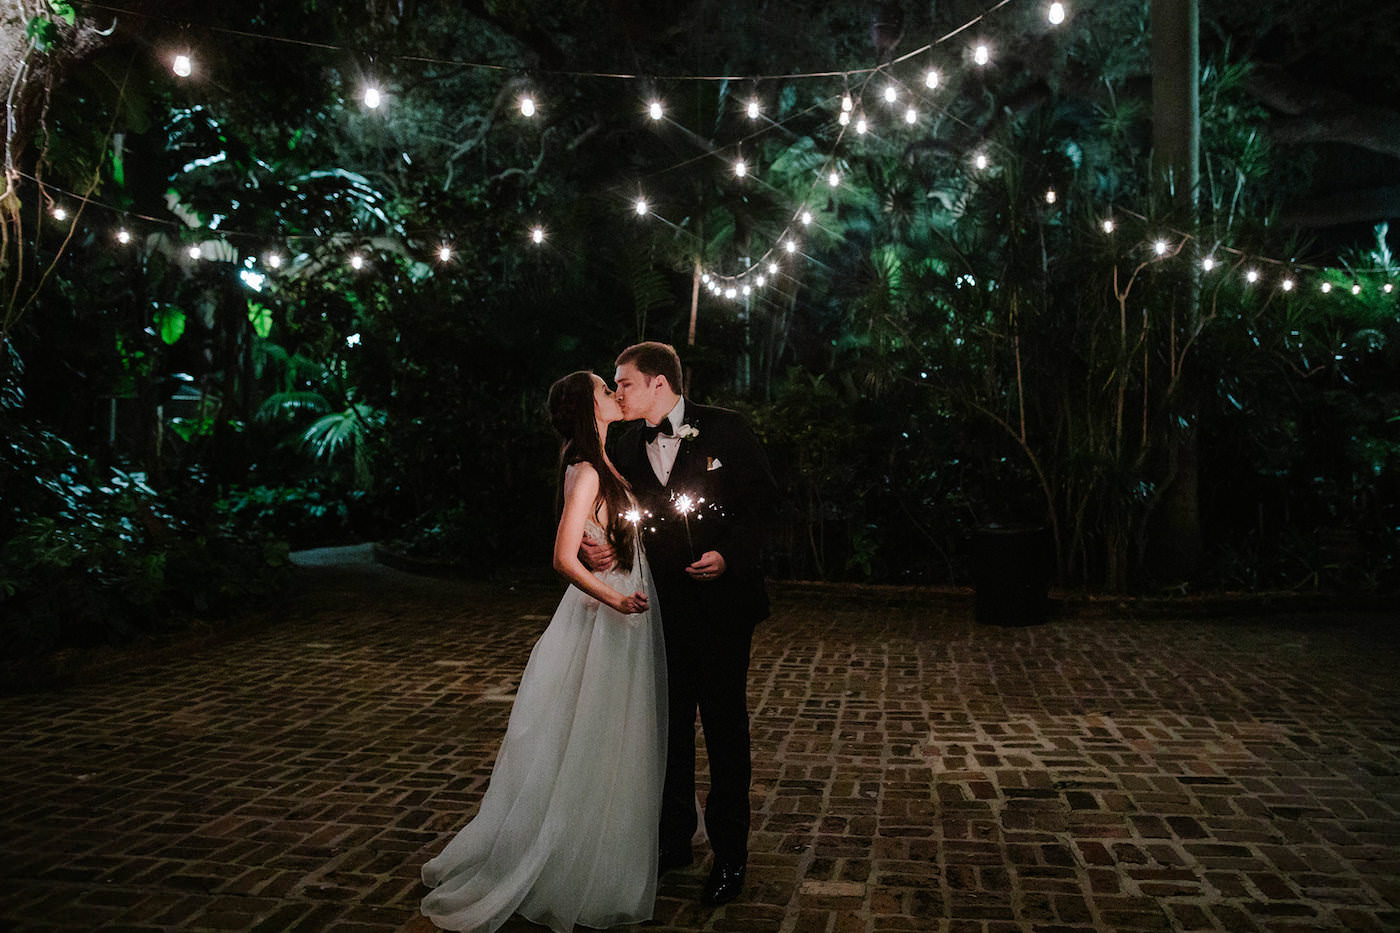 Bride and Groom Outdoor Night Portrait Shot with Sparklers and Canopy String Lights